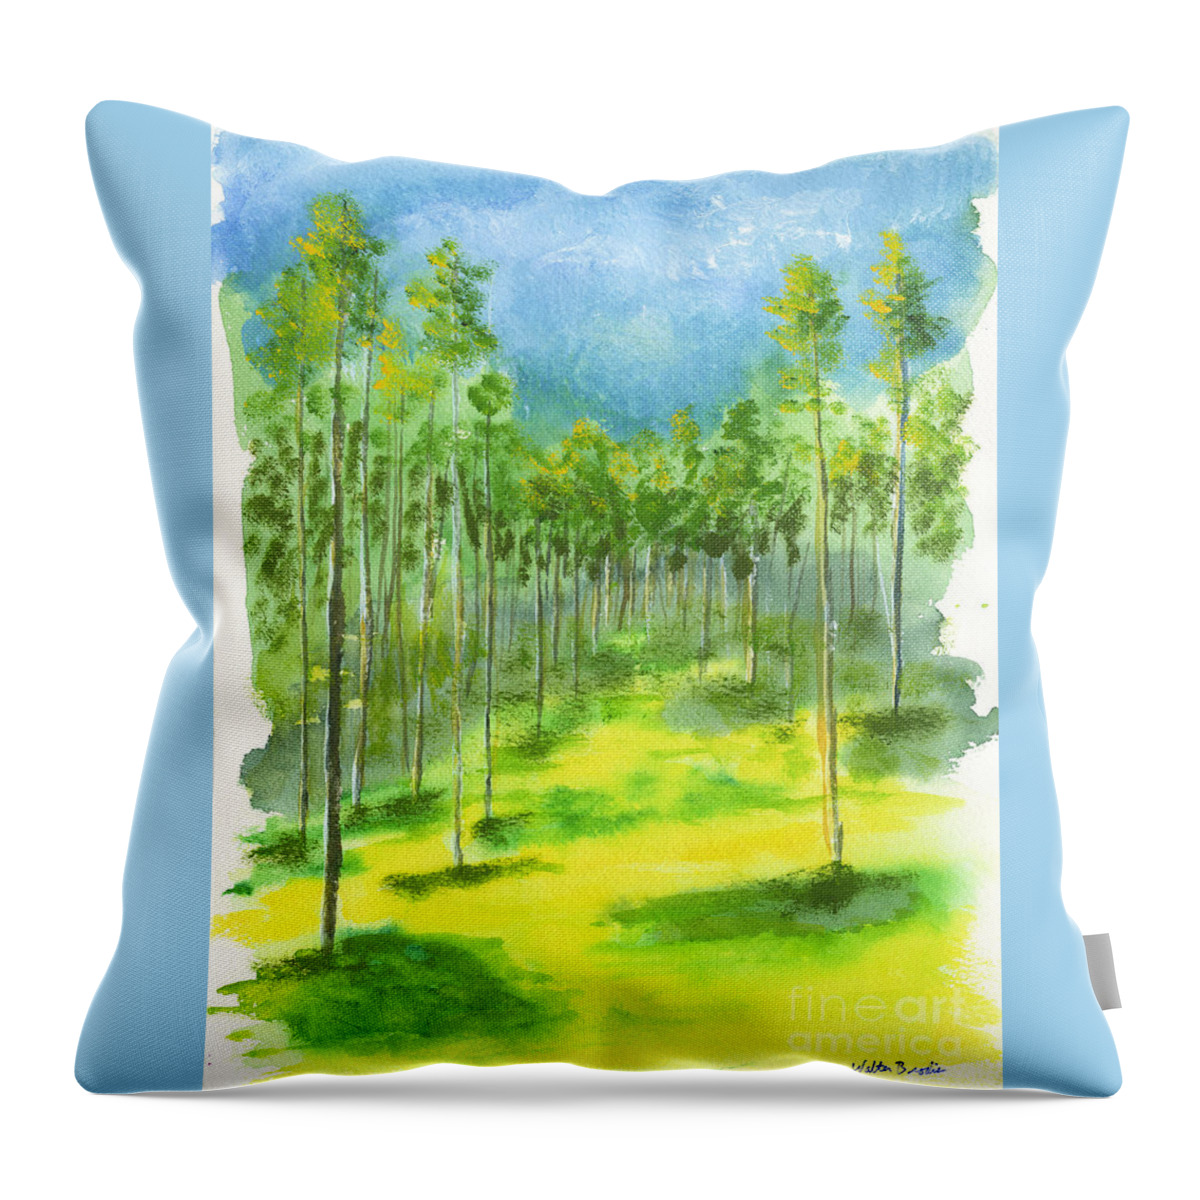 Birch Trees Throw Pillow featuring the painting Birch Glen by Walt Brodis